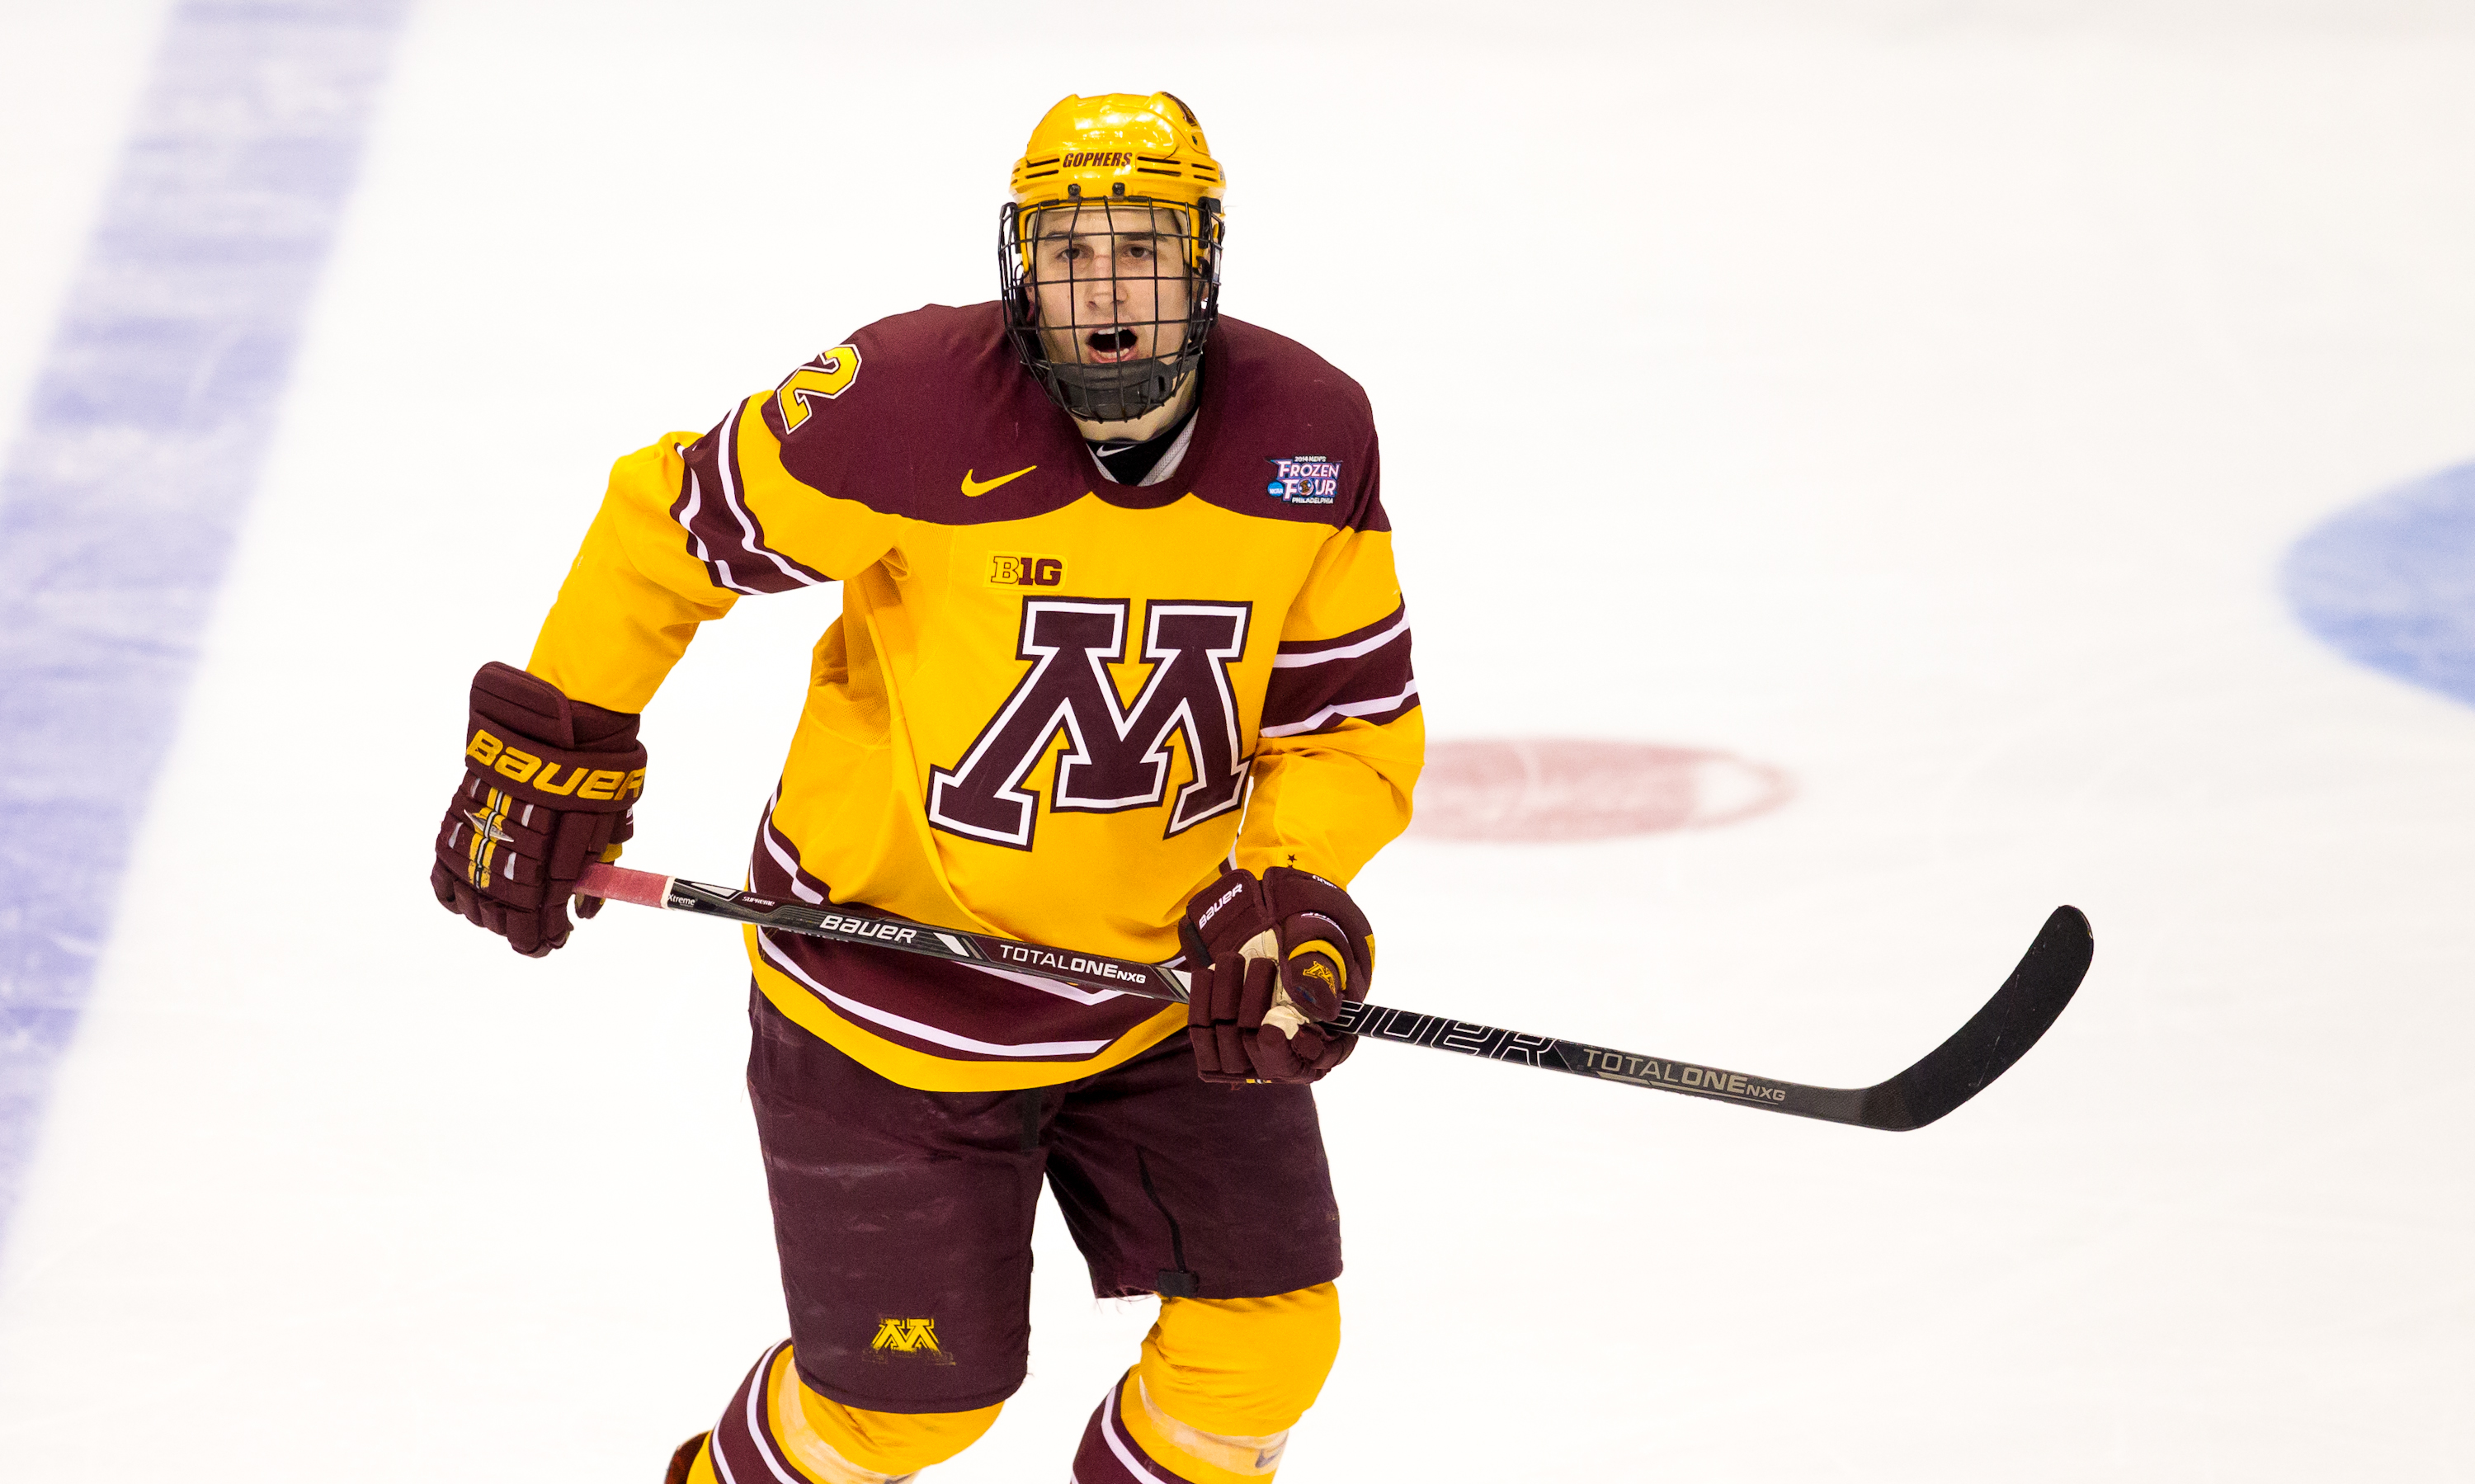 PHILADELPHIA, PA - APRIL 10: Brady Skjei #2 of the Minnesota Golden Gophers yells up ice against North Dakota during the NCAA Division I Men's Ice Hockey Frozen Four Championship Semifinal at the Wells Fargo Center on April 10, 2014 in Philadelphia, Pennsylvania. (Photo by Richard T Gagnon/Getty Images)